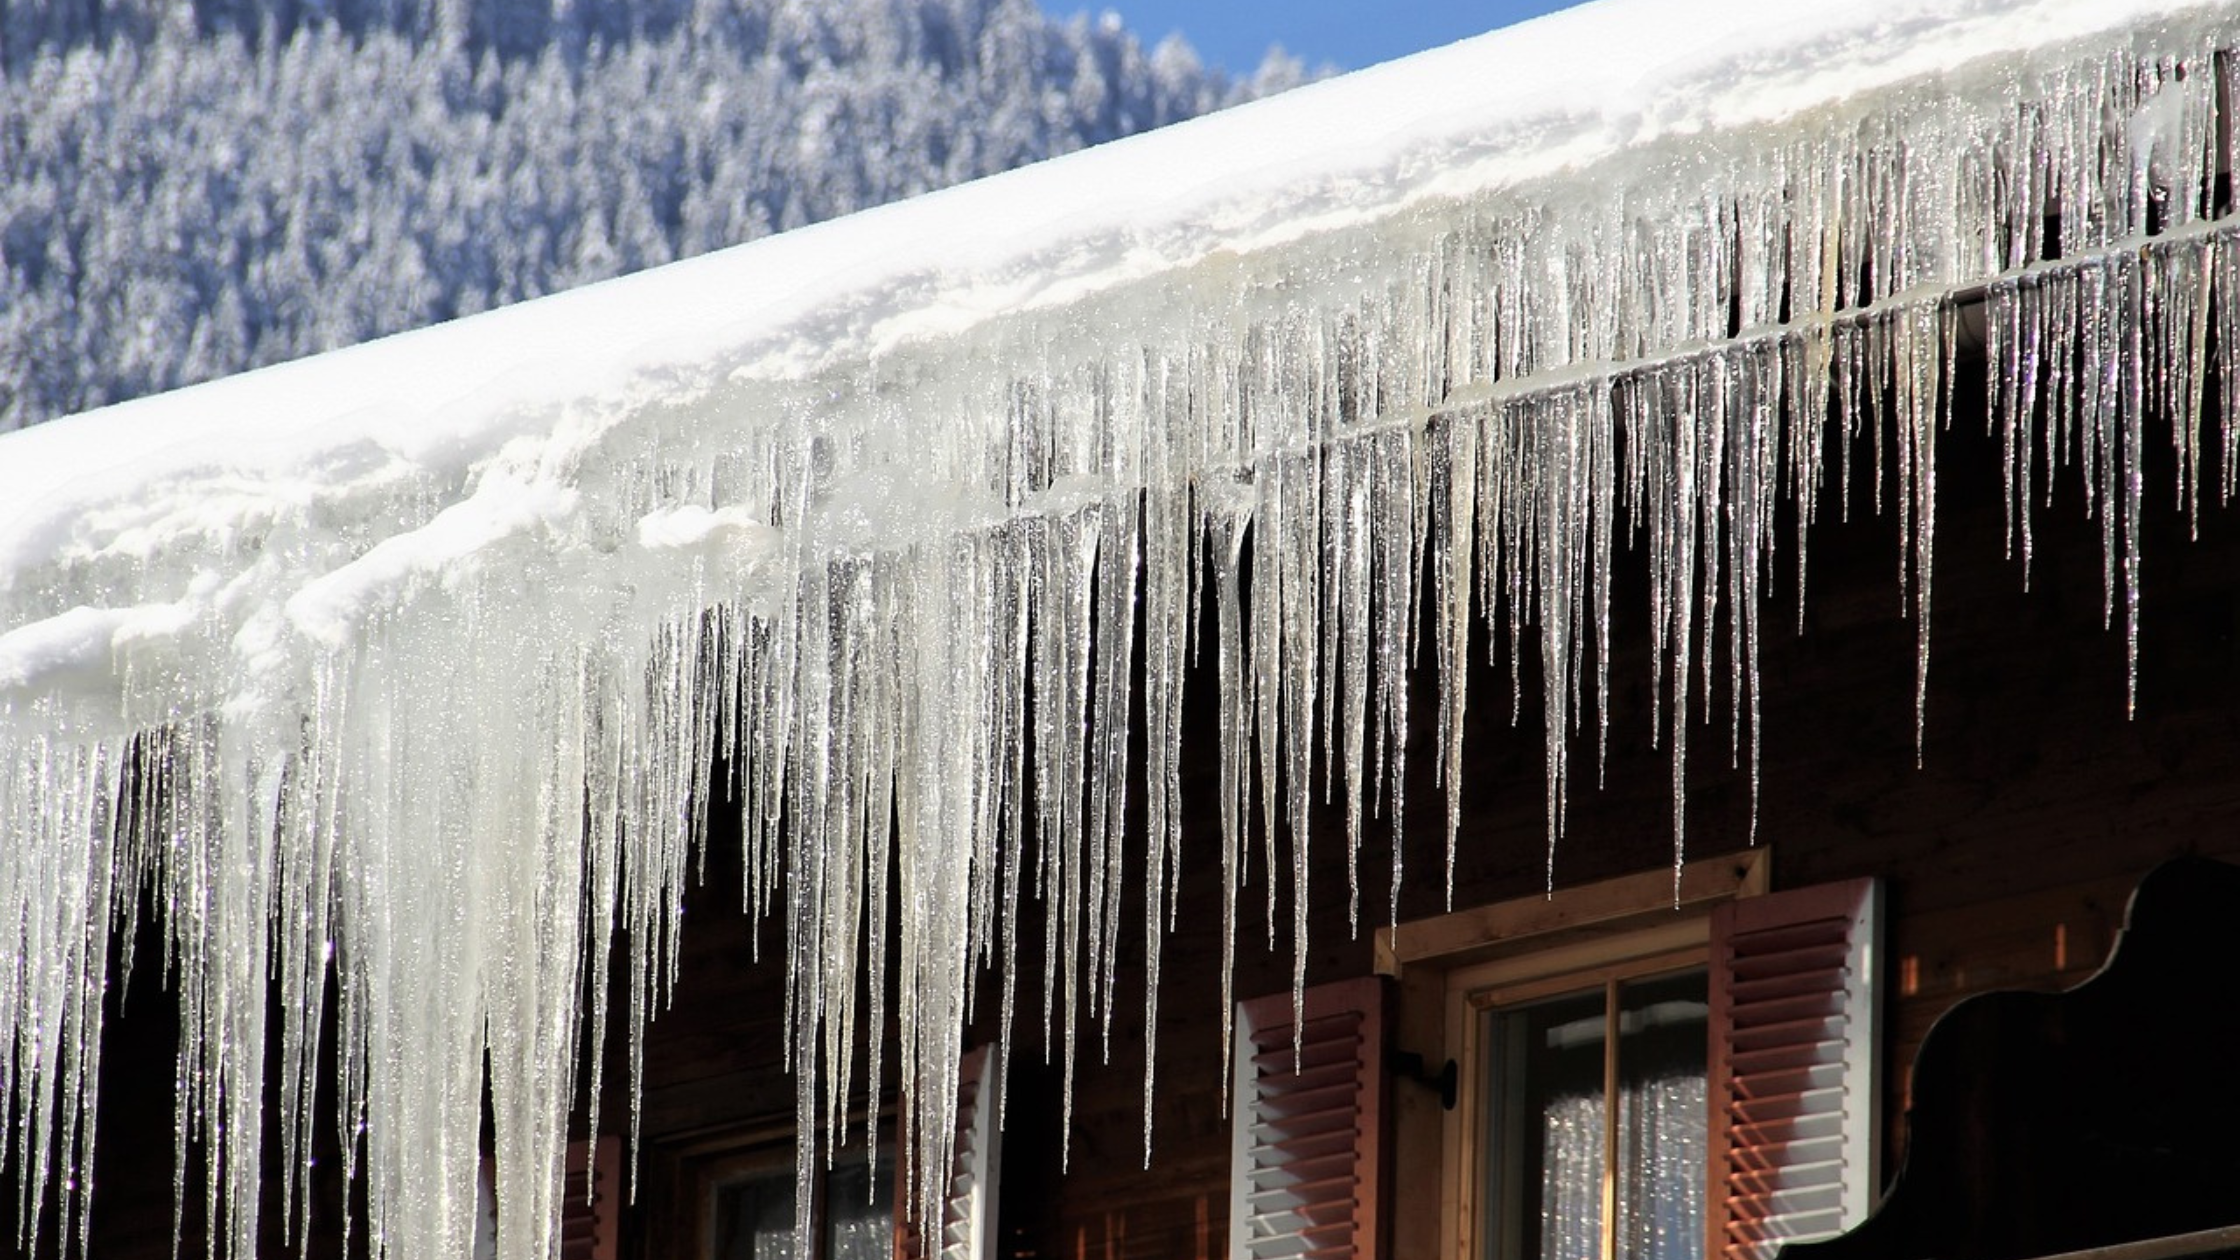 Ice Dams hanging from the roof of a house